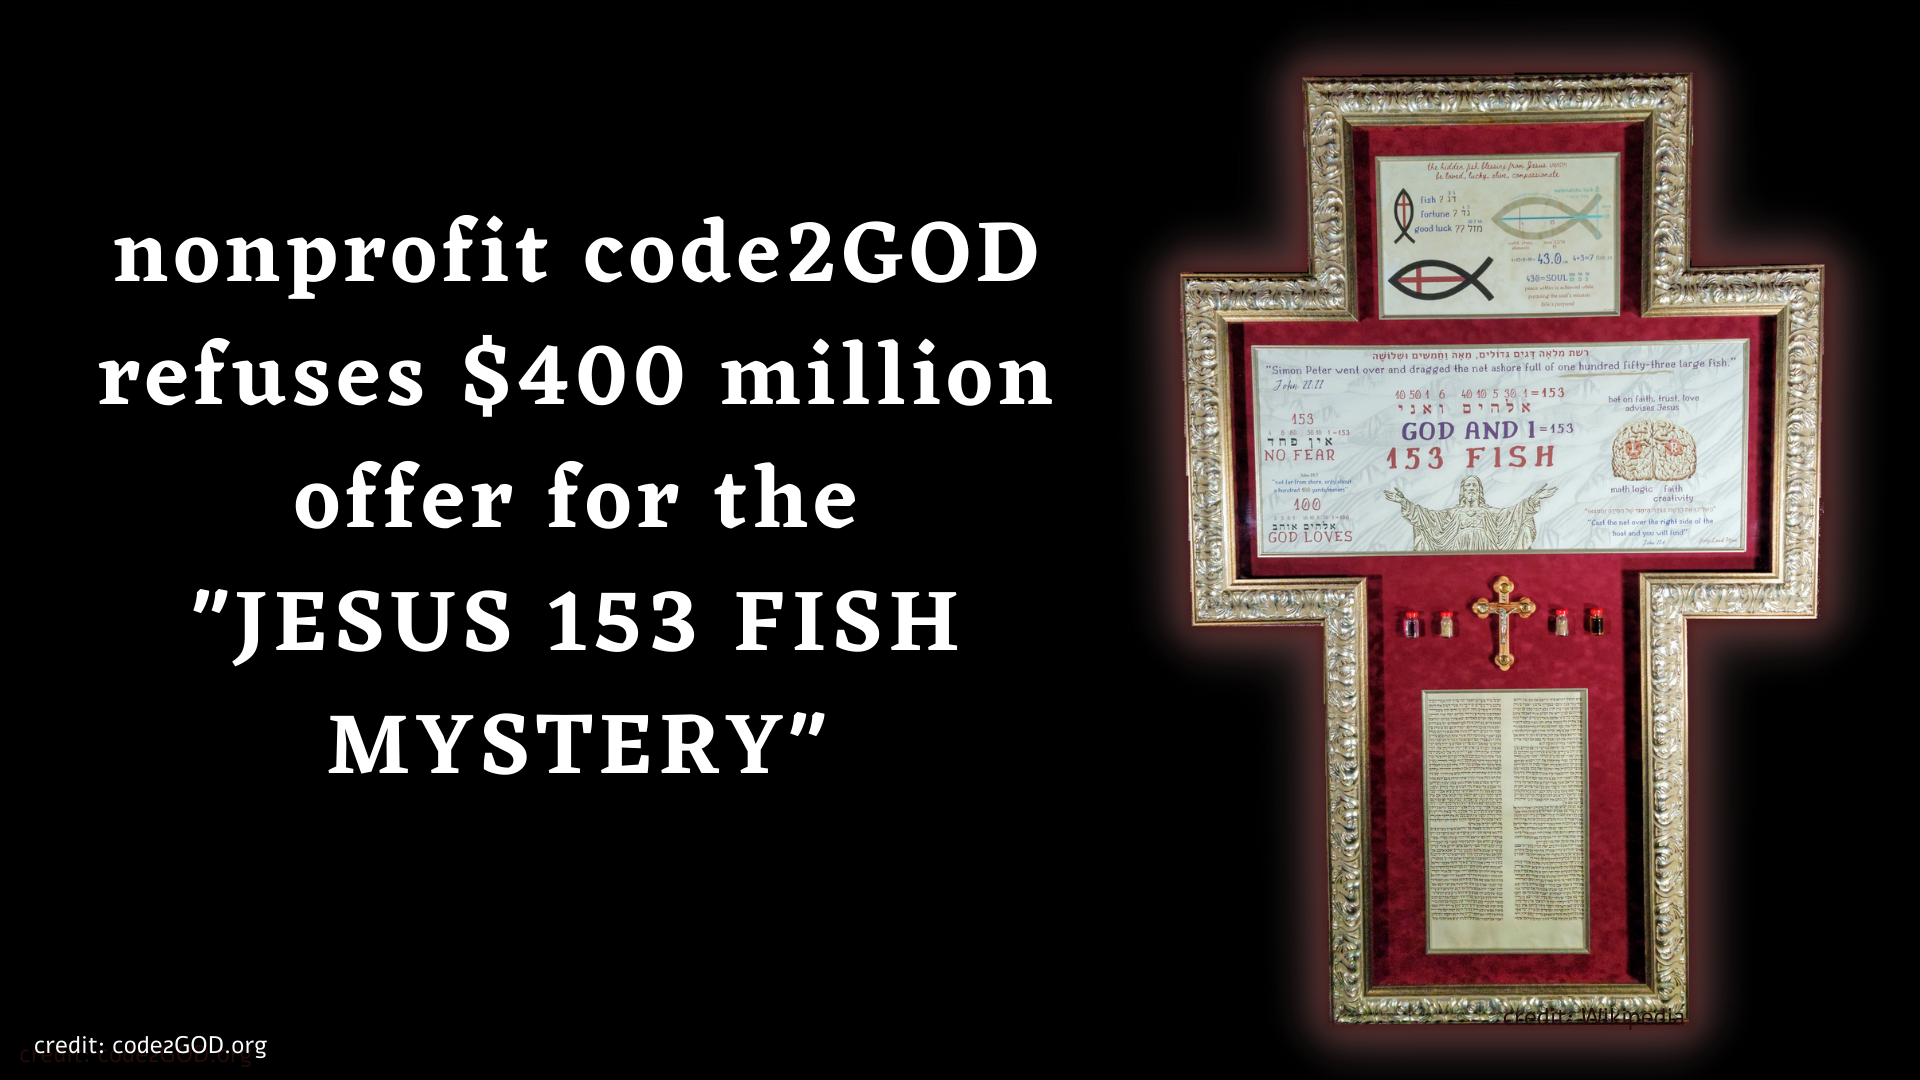 nonprofit code2GOD refuses $400 million offer for the "JESUS 153 FISH MYSTERY"